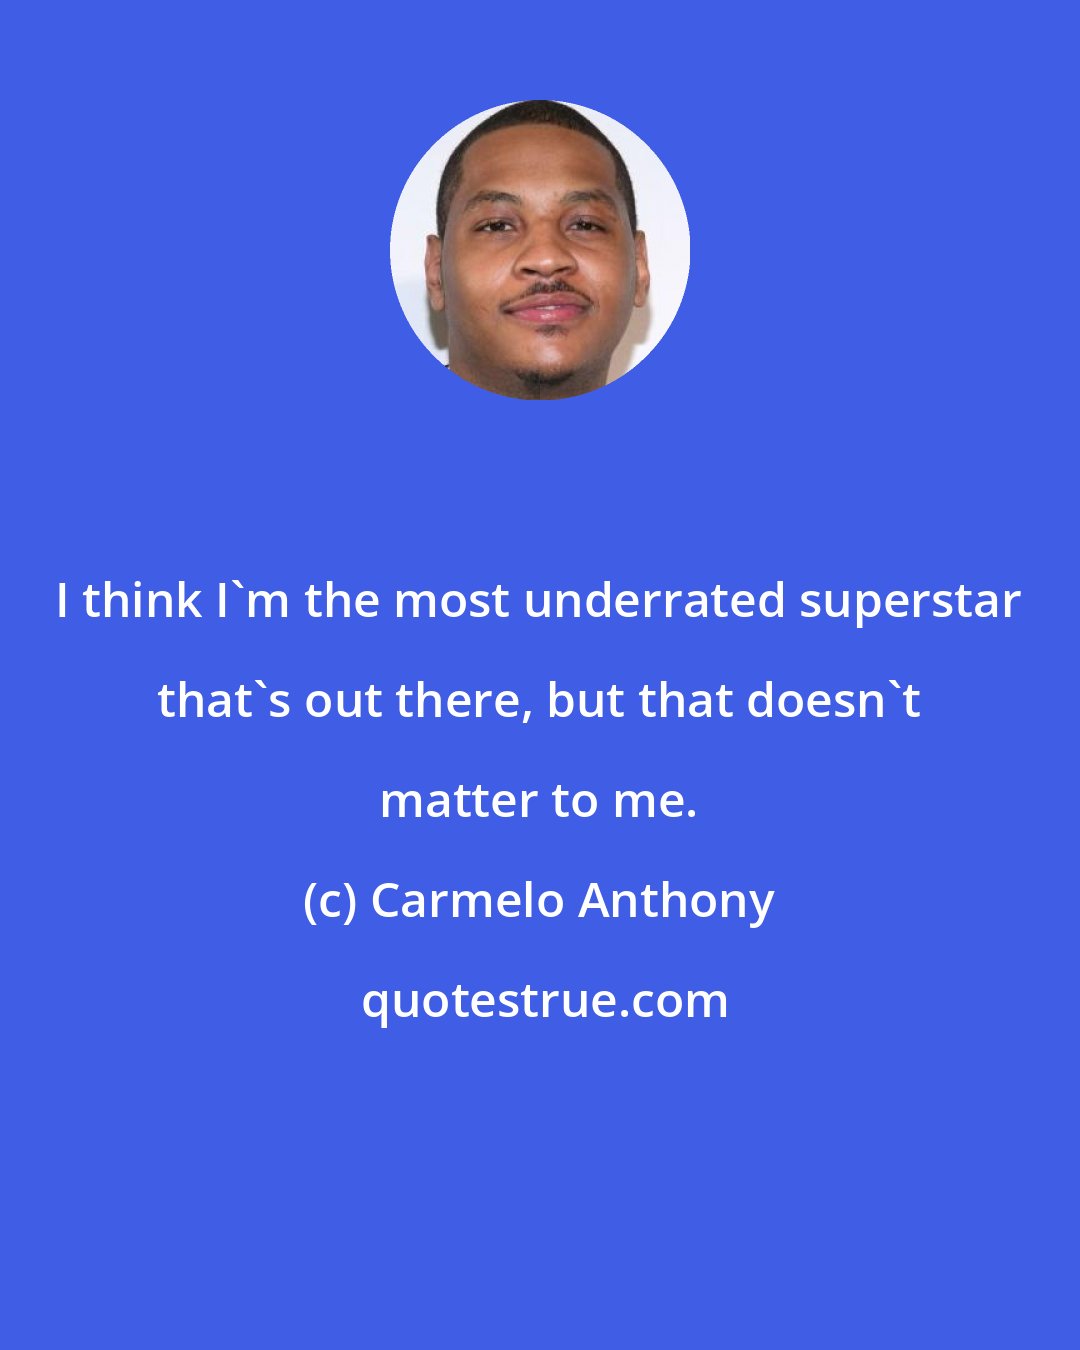 Carmelo Anthony: I think I'm the most underrated superstar that's out there, but that doesn't matter to me.